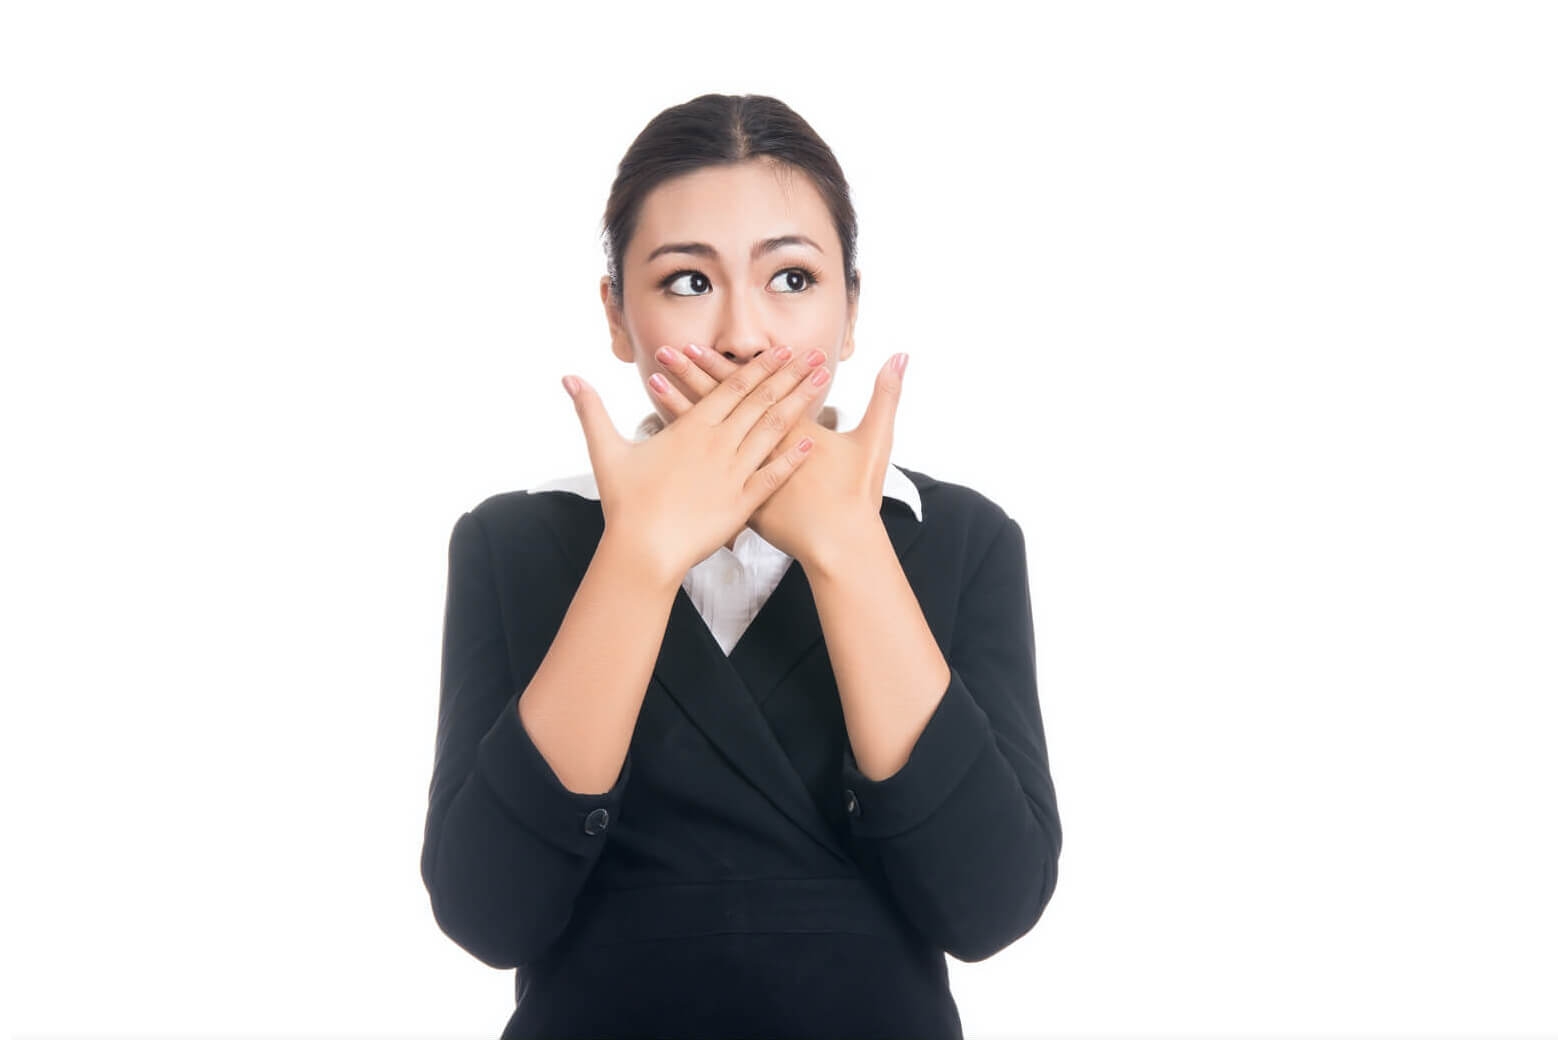 Job interview tips: What not to say during job interviews - Xcruit